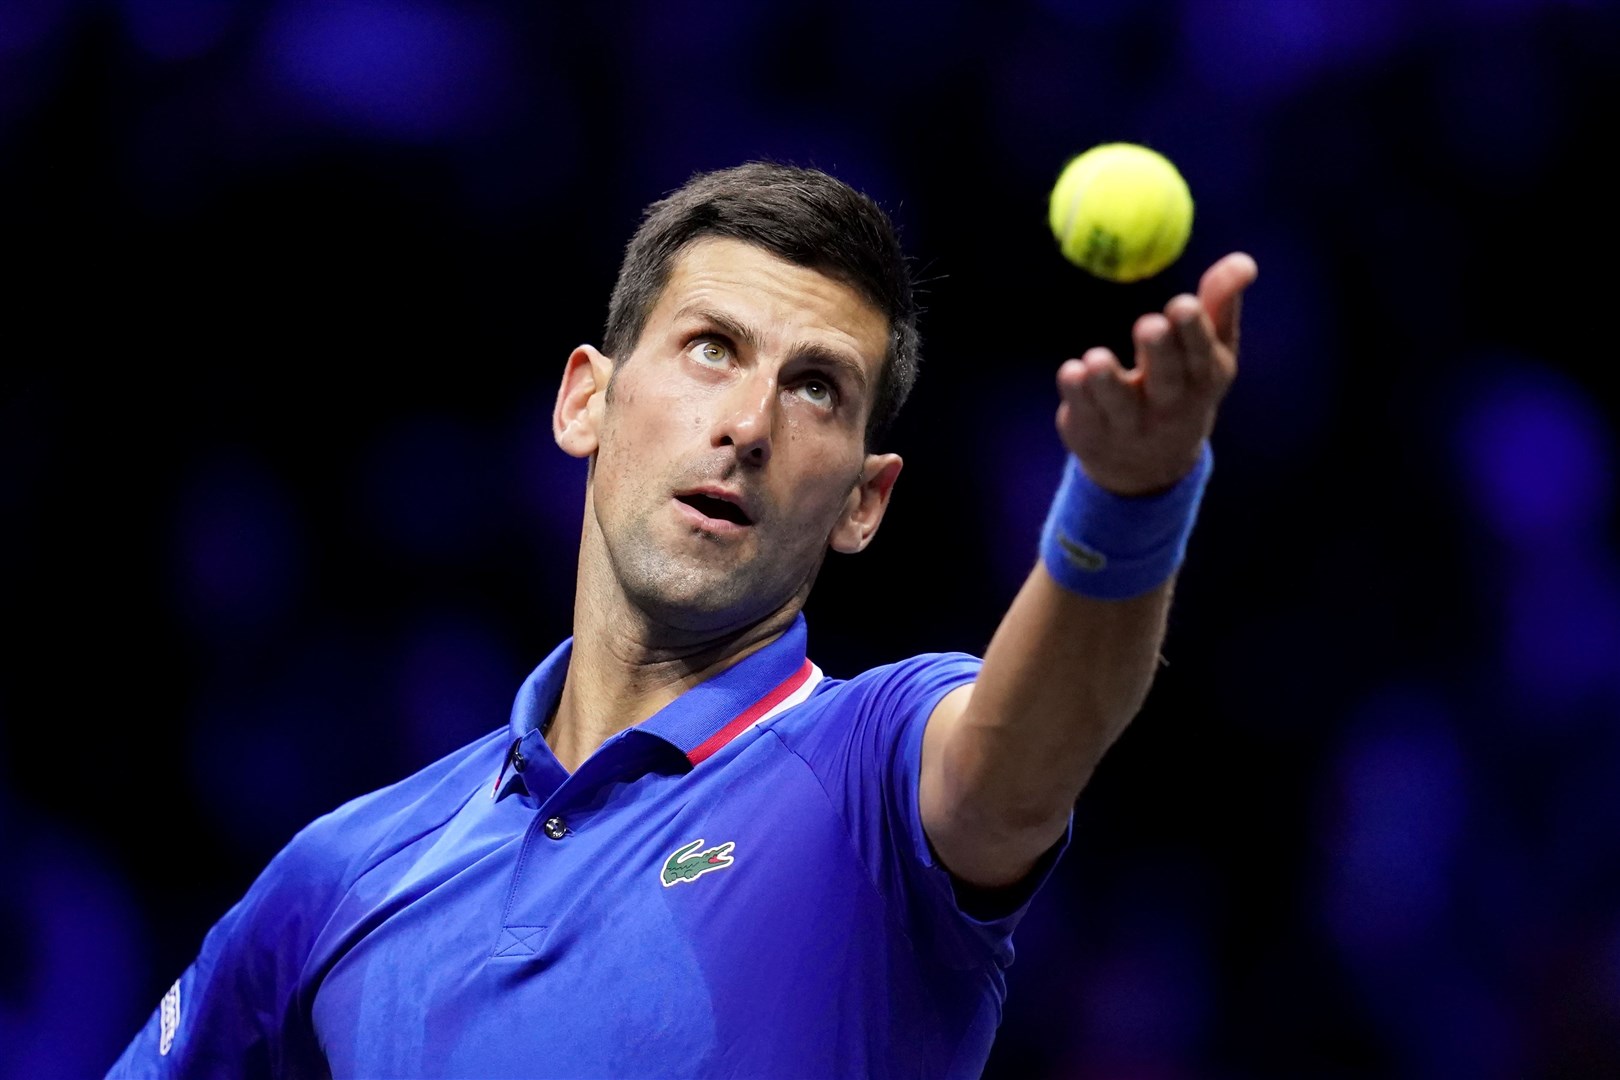 Novak Djokovic, who Becker coached from 2013 to 2016 when the former tennis number one won his career slam, also appears (PA).